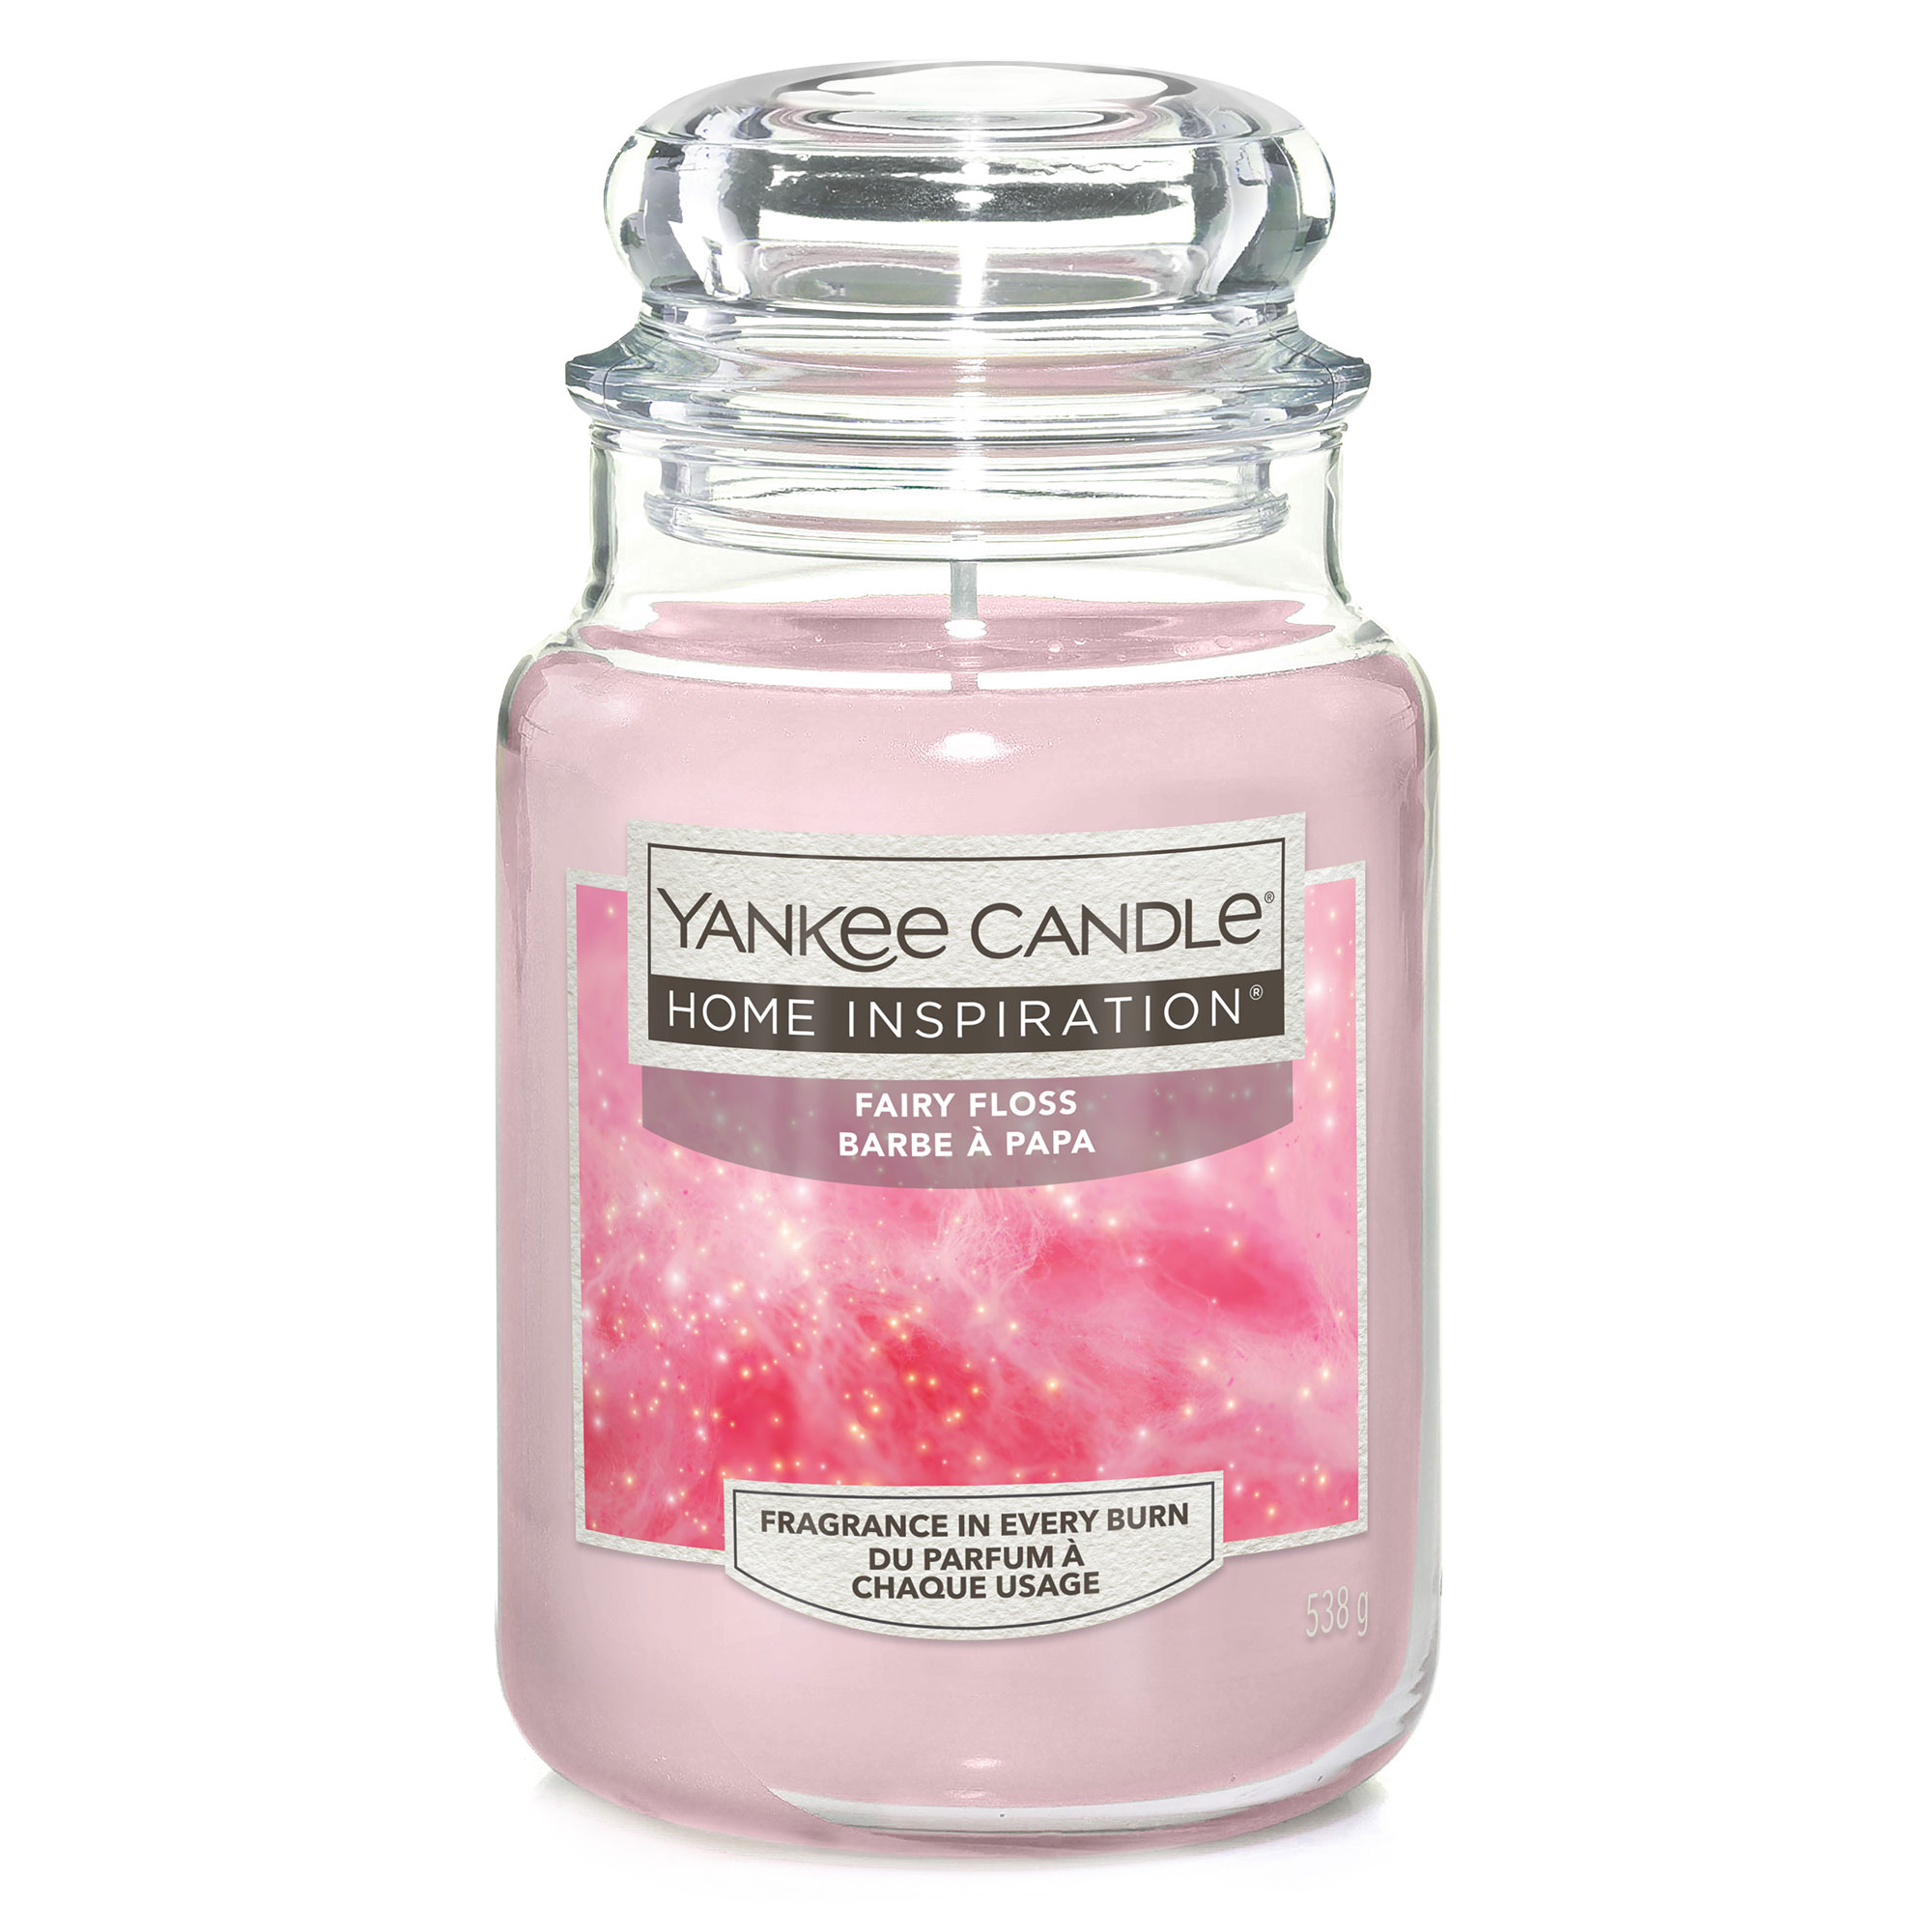 Yankee Candle Home Inspiration Fairy Floss Large Jar